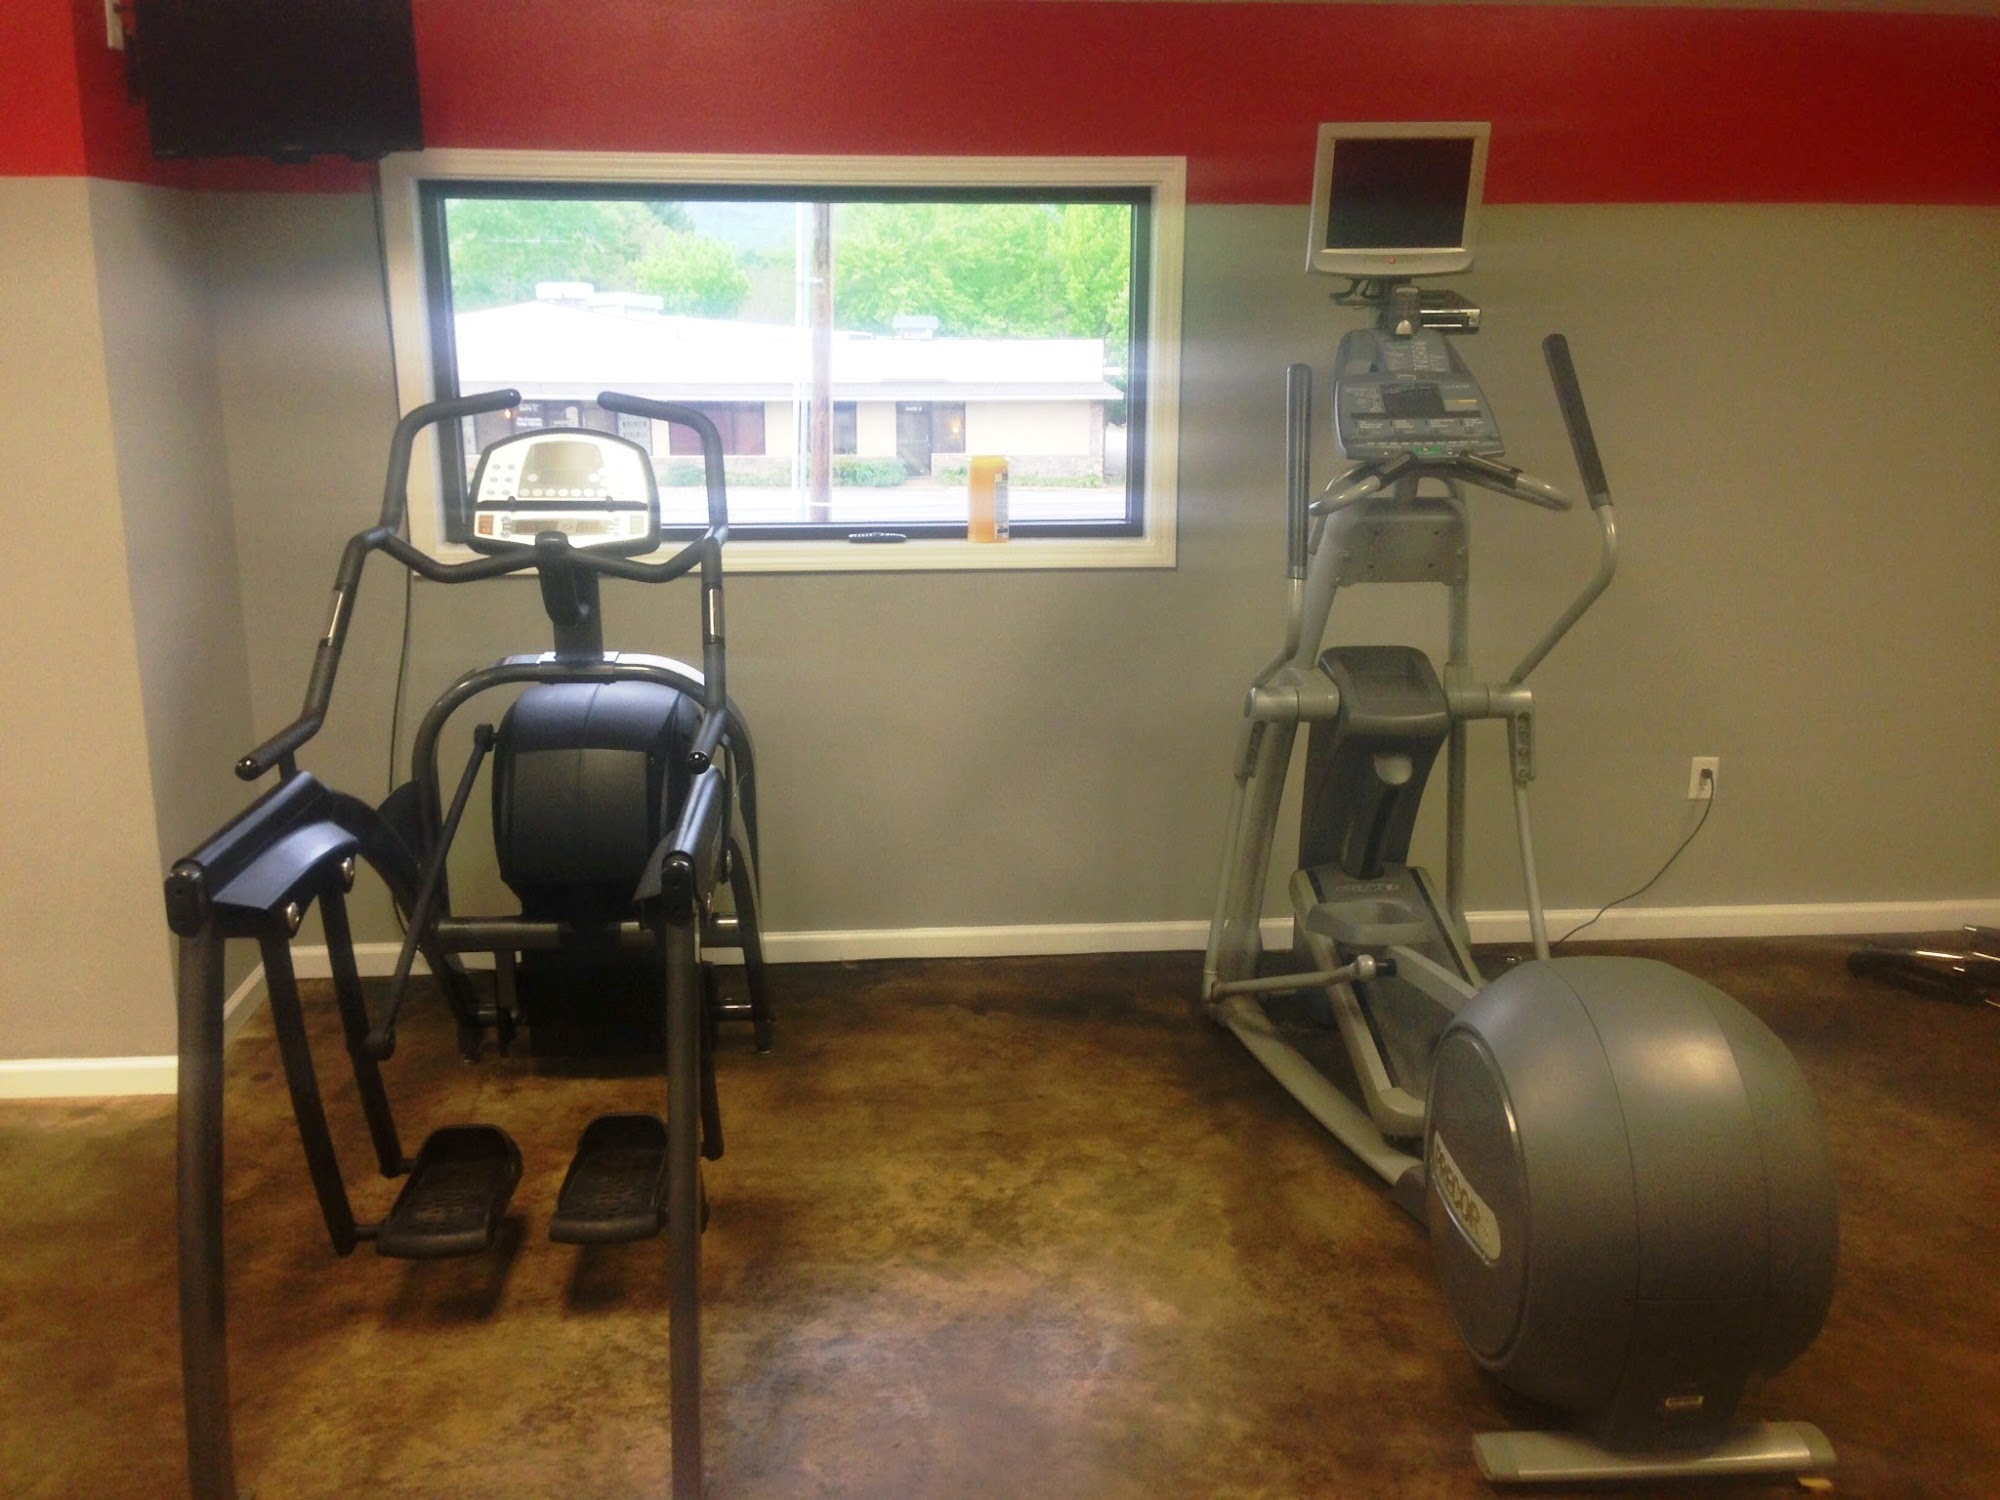 Ivy Physical Therapy, PA 201 S 7th St, Heber Springs Arkansas 72543